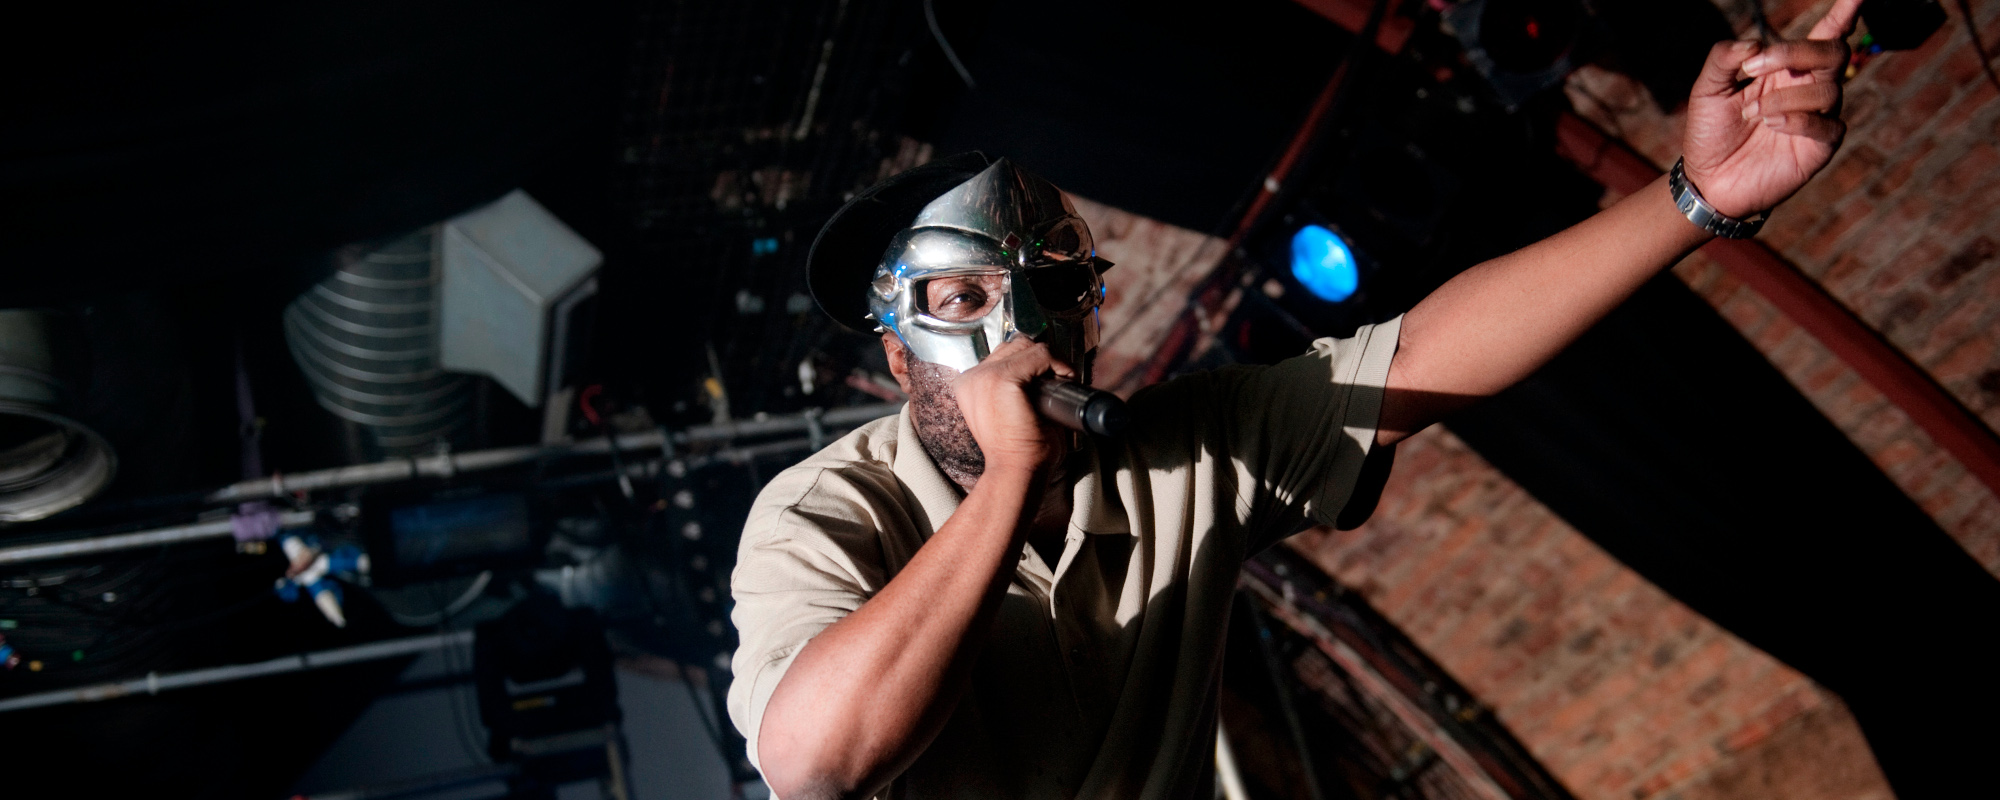 Hospital Where MF DOOM Died Issues Apology to Rapper’s Family